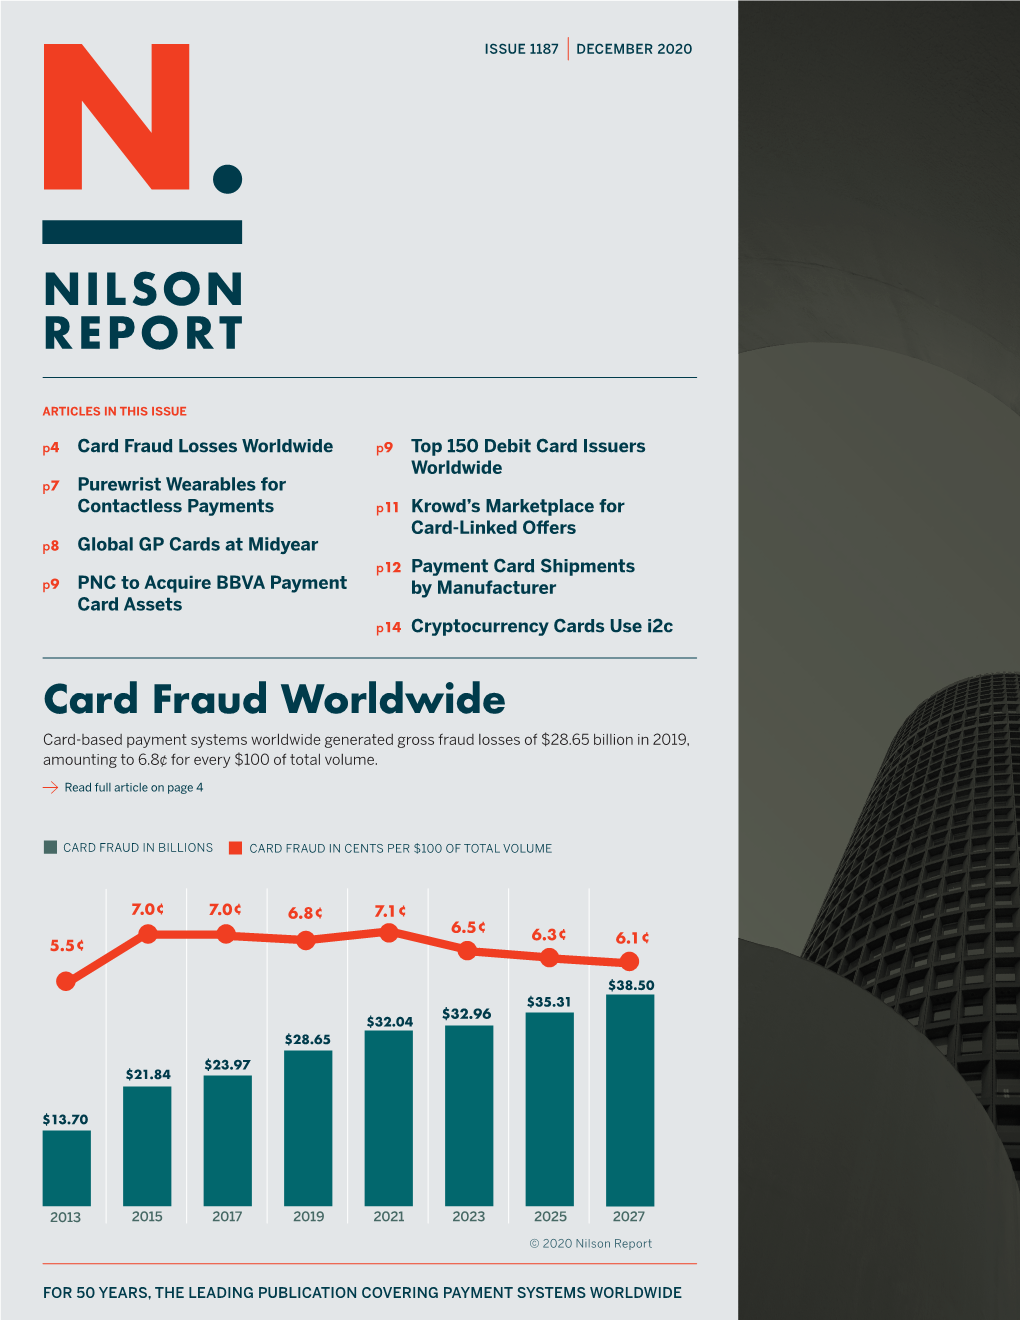 Card Fraud Worldwide Card-Based Payment Systems Worldwide Generated Gross Fraud Losses of $28.65 Billion in 2019, Amounting to 6.8¢ for Every $100 of Total Volume